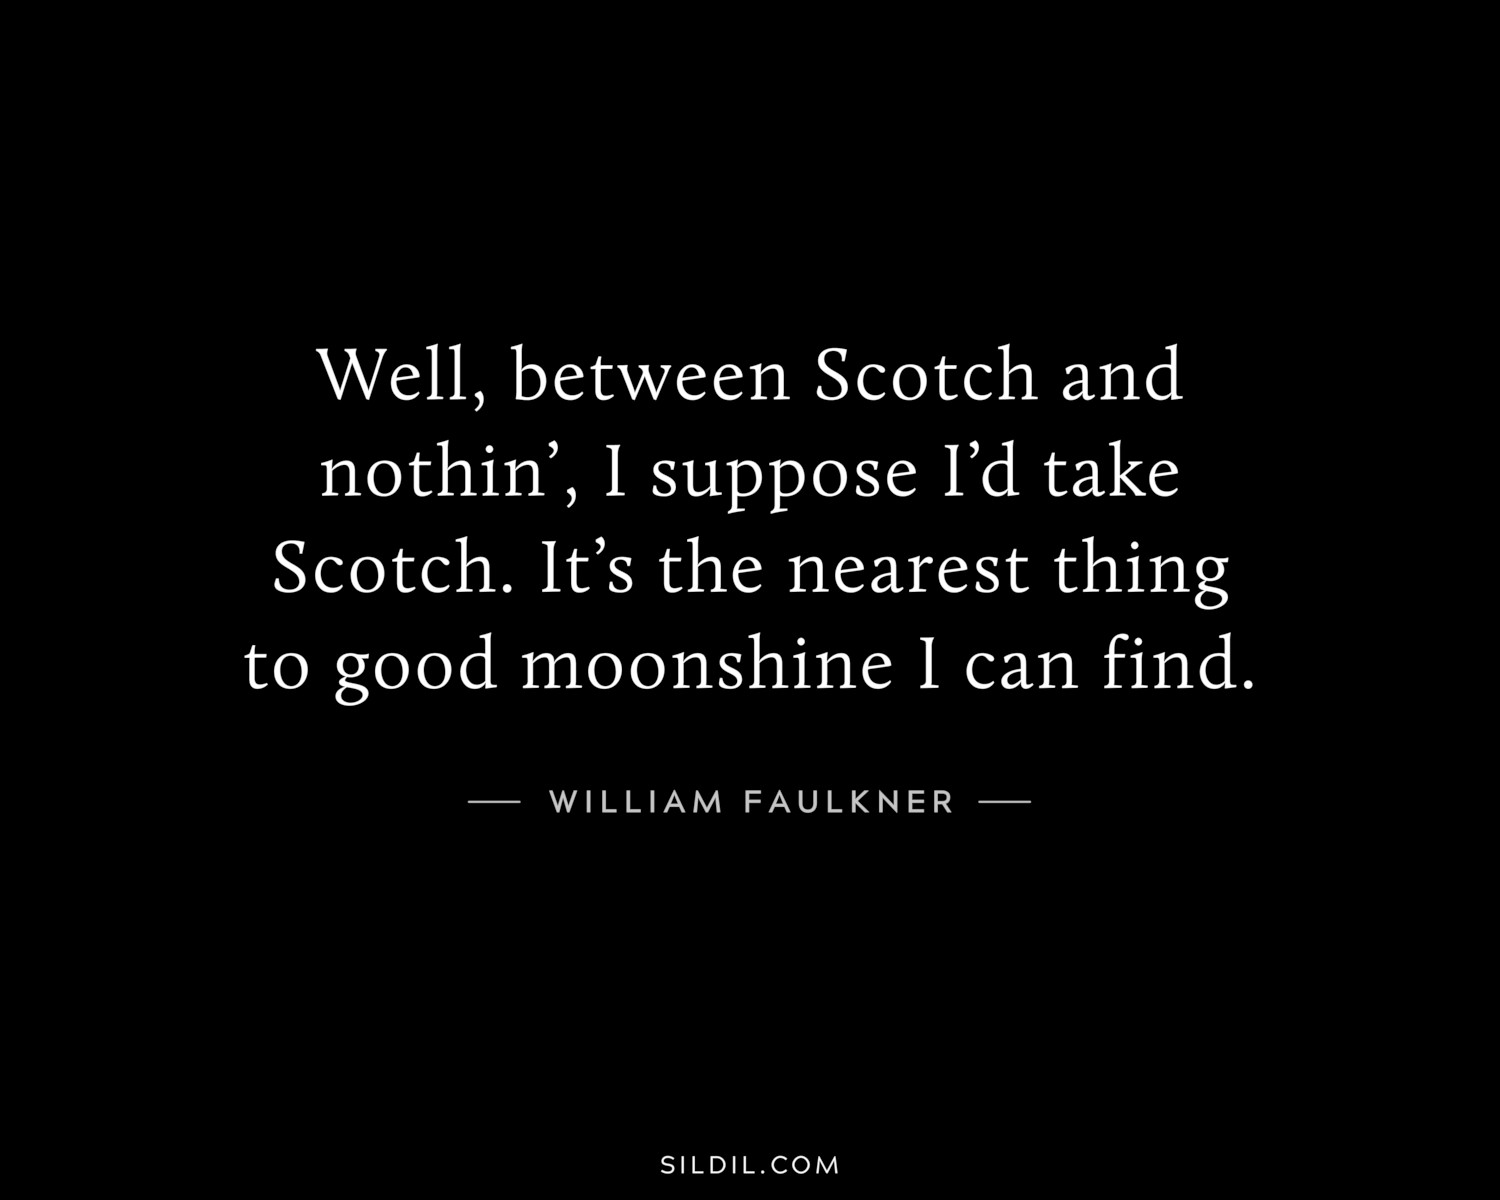 Well, between Scotch and nothin’, I suppose I’d take Scotch. It’s the nearest thing to good moonshine I can find.